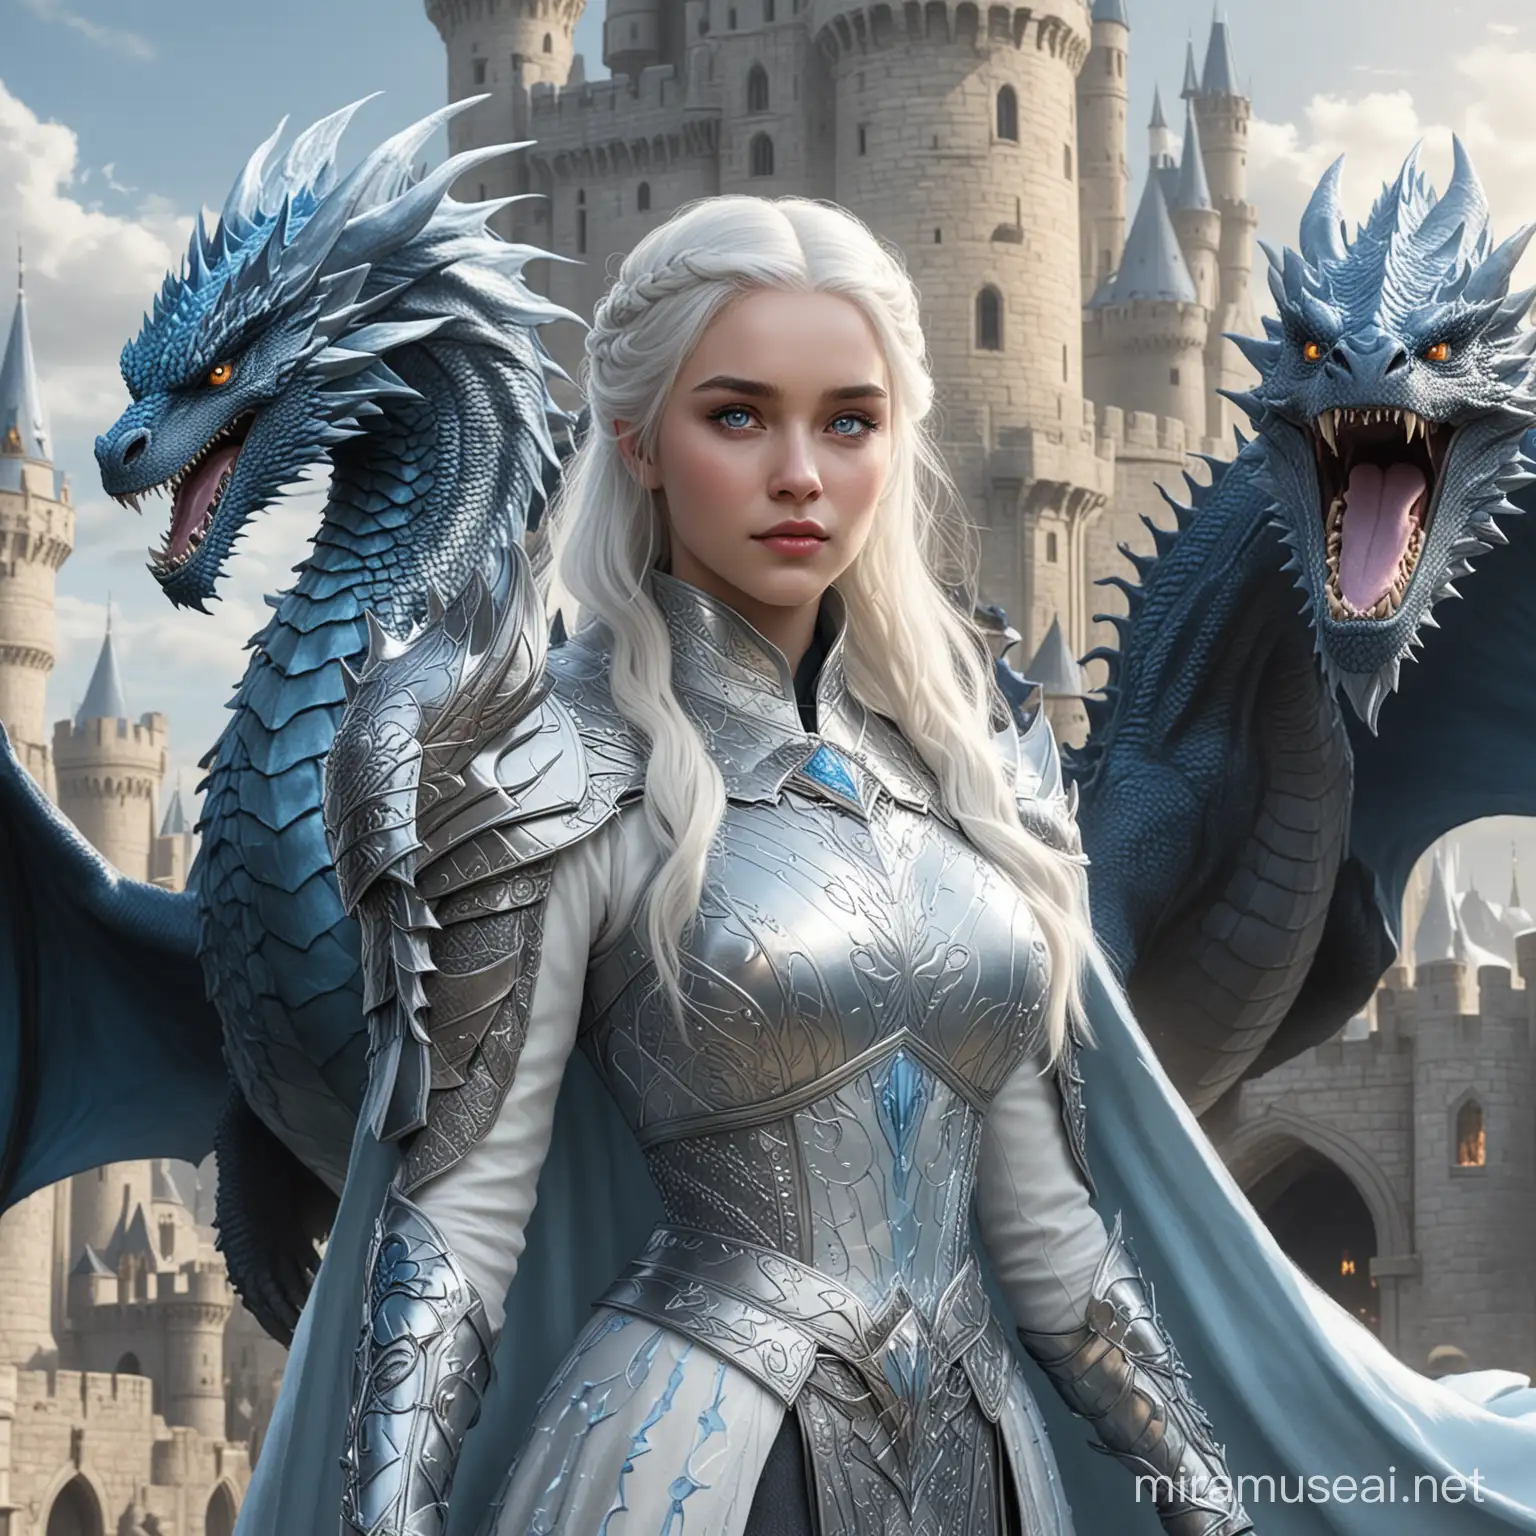 Targaryen Princess with Silver and Blue Dragon in Castle Setting